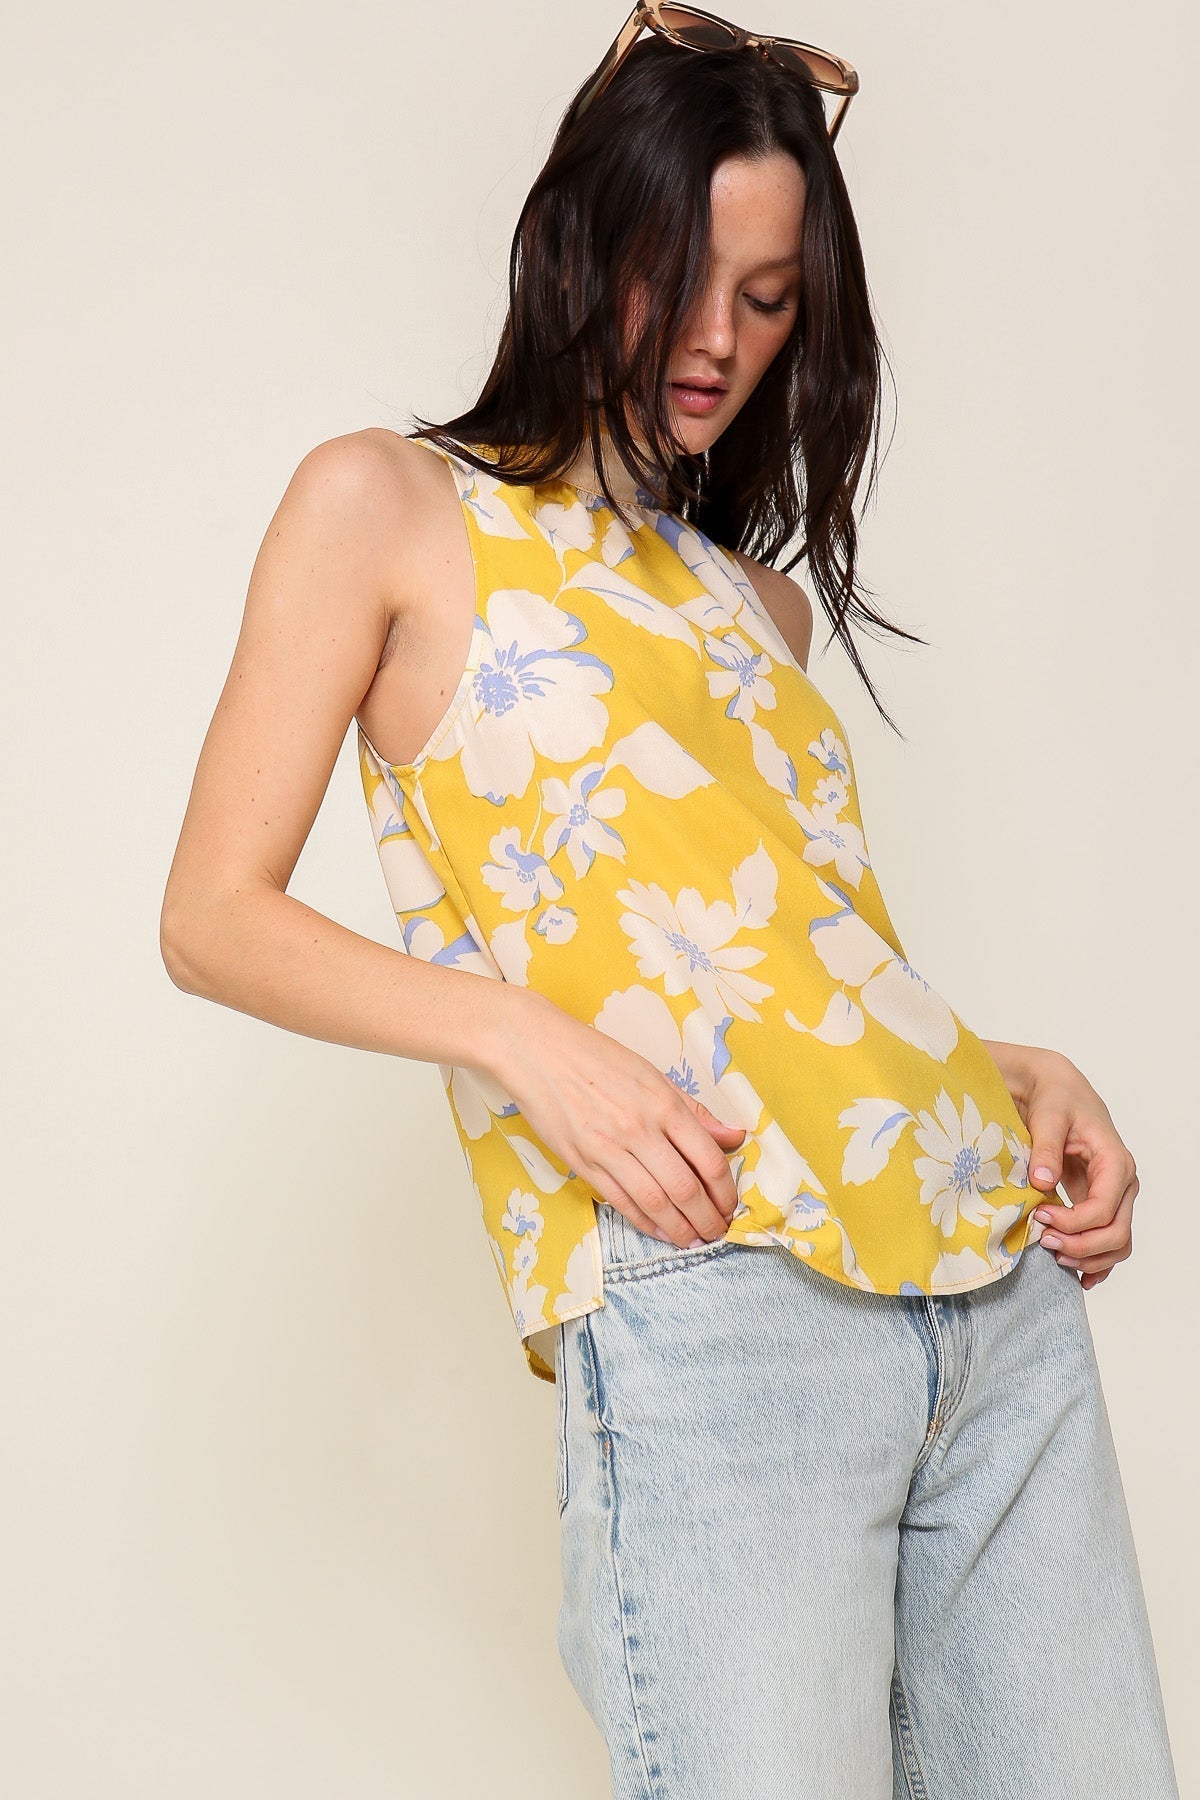 Timing (MN9462R23) Women's Sleeveles High Neck Floral Print Sleeveless Top in Yellow and Cream print